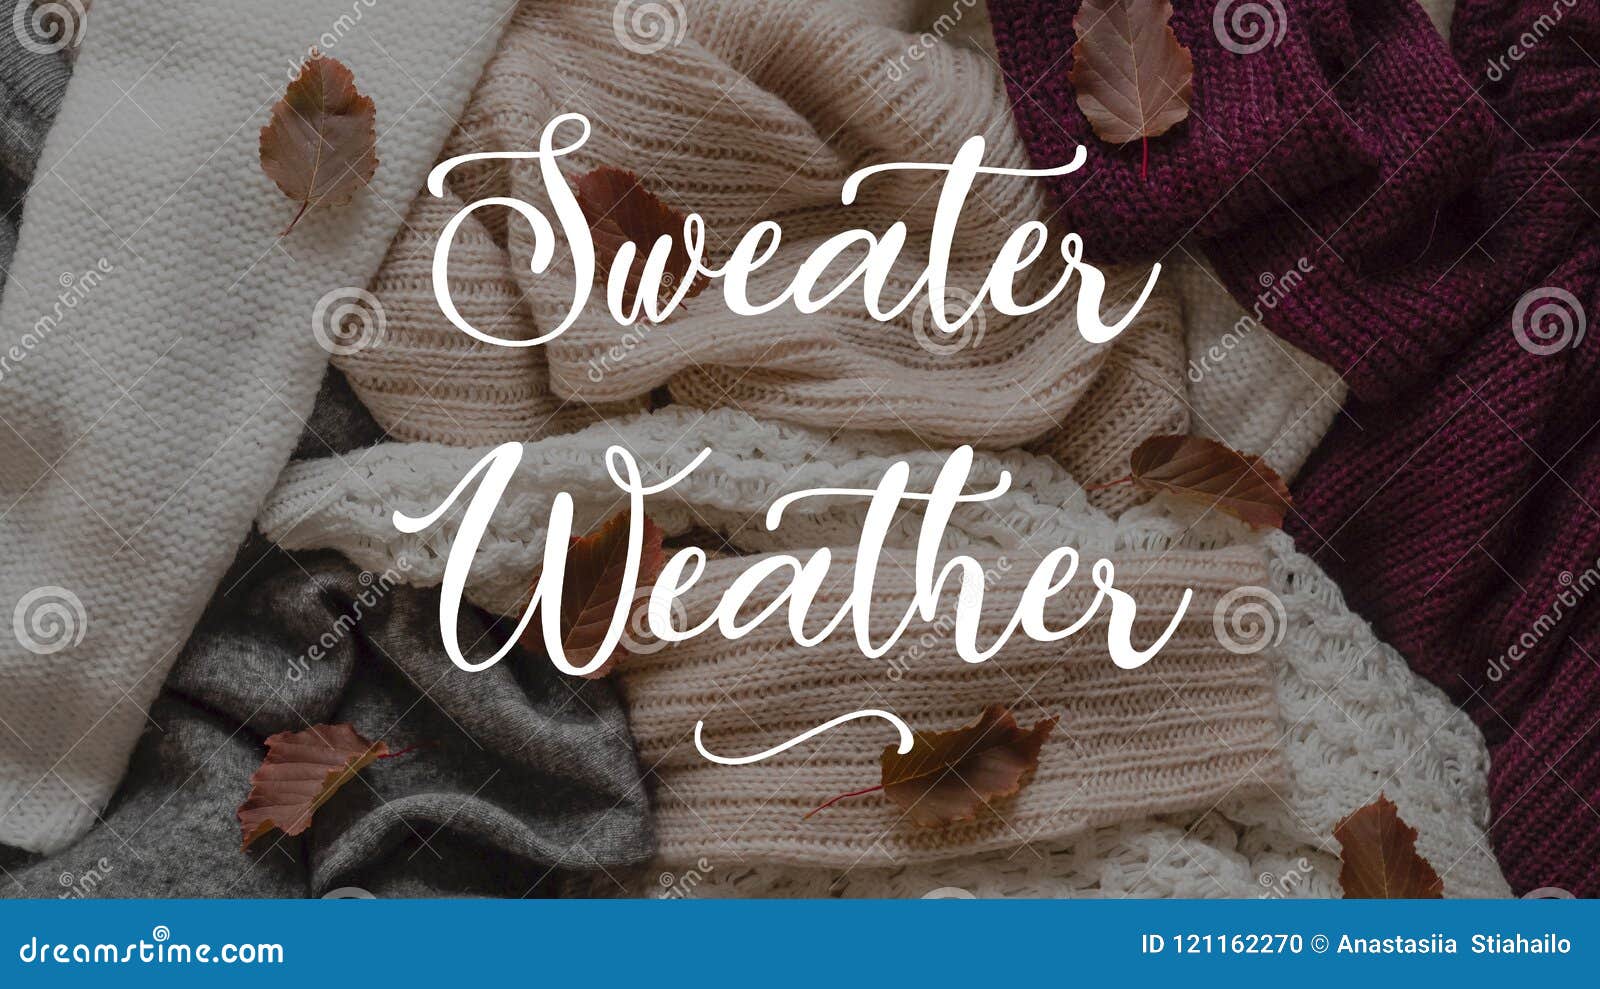 Sweater Weather Wallpaper  Weather wallpaper Wallpaper Sweater weather